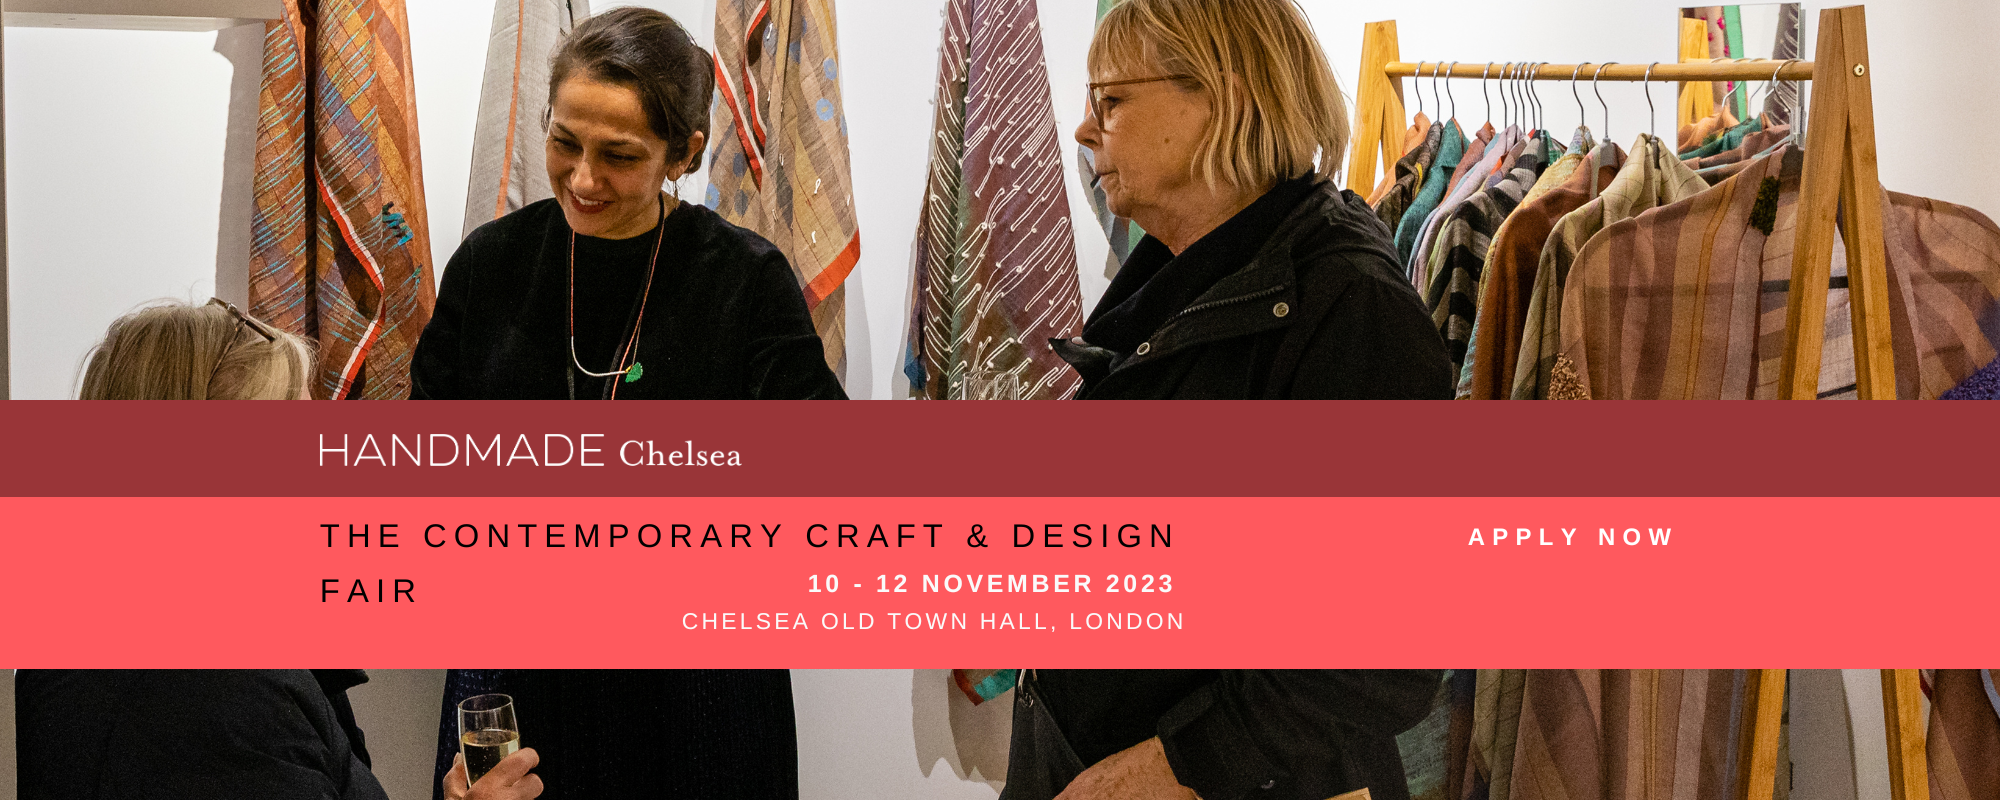 *Limited Spaces* for Handmade Chelsea in London  Image #0